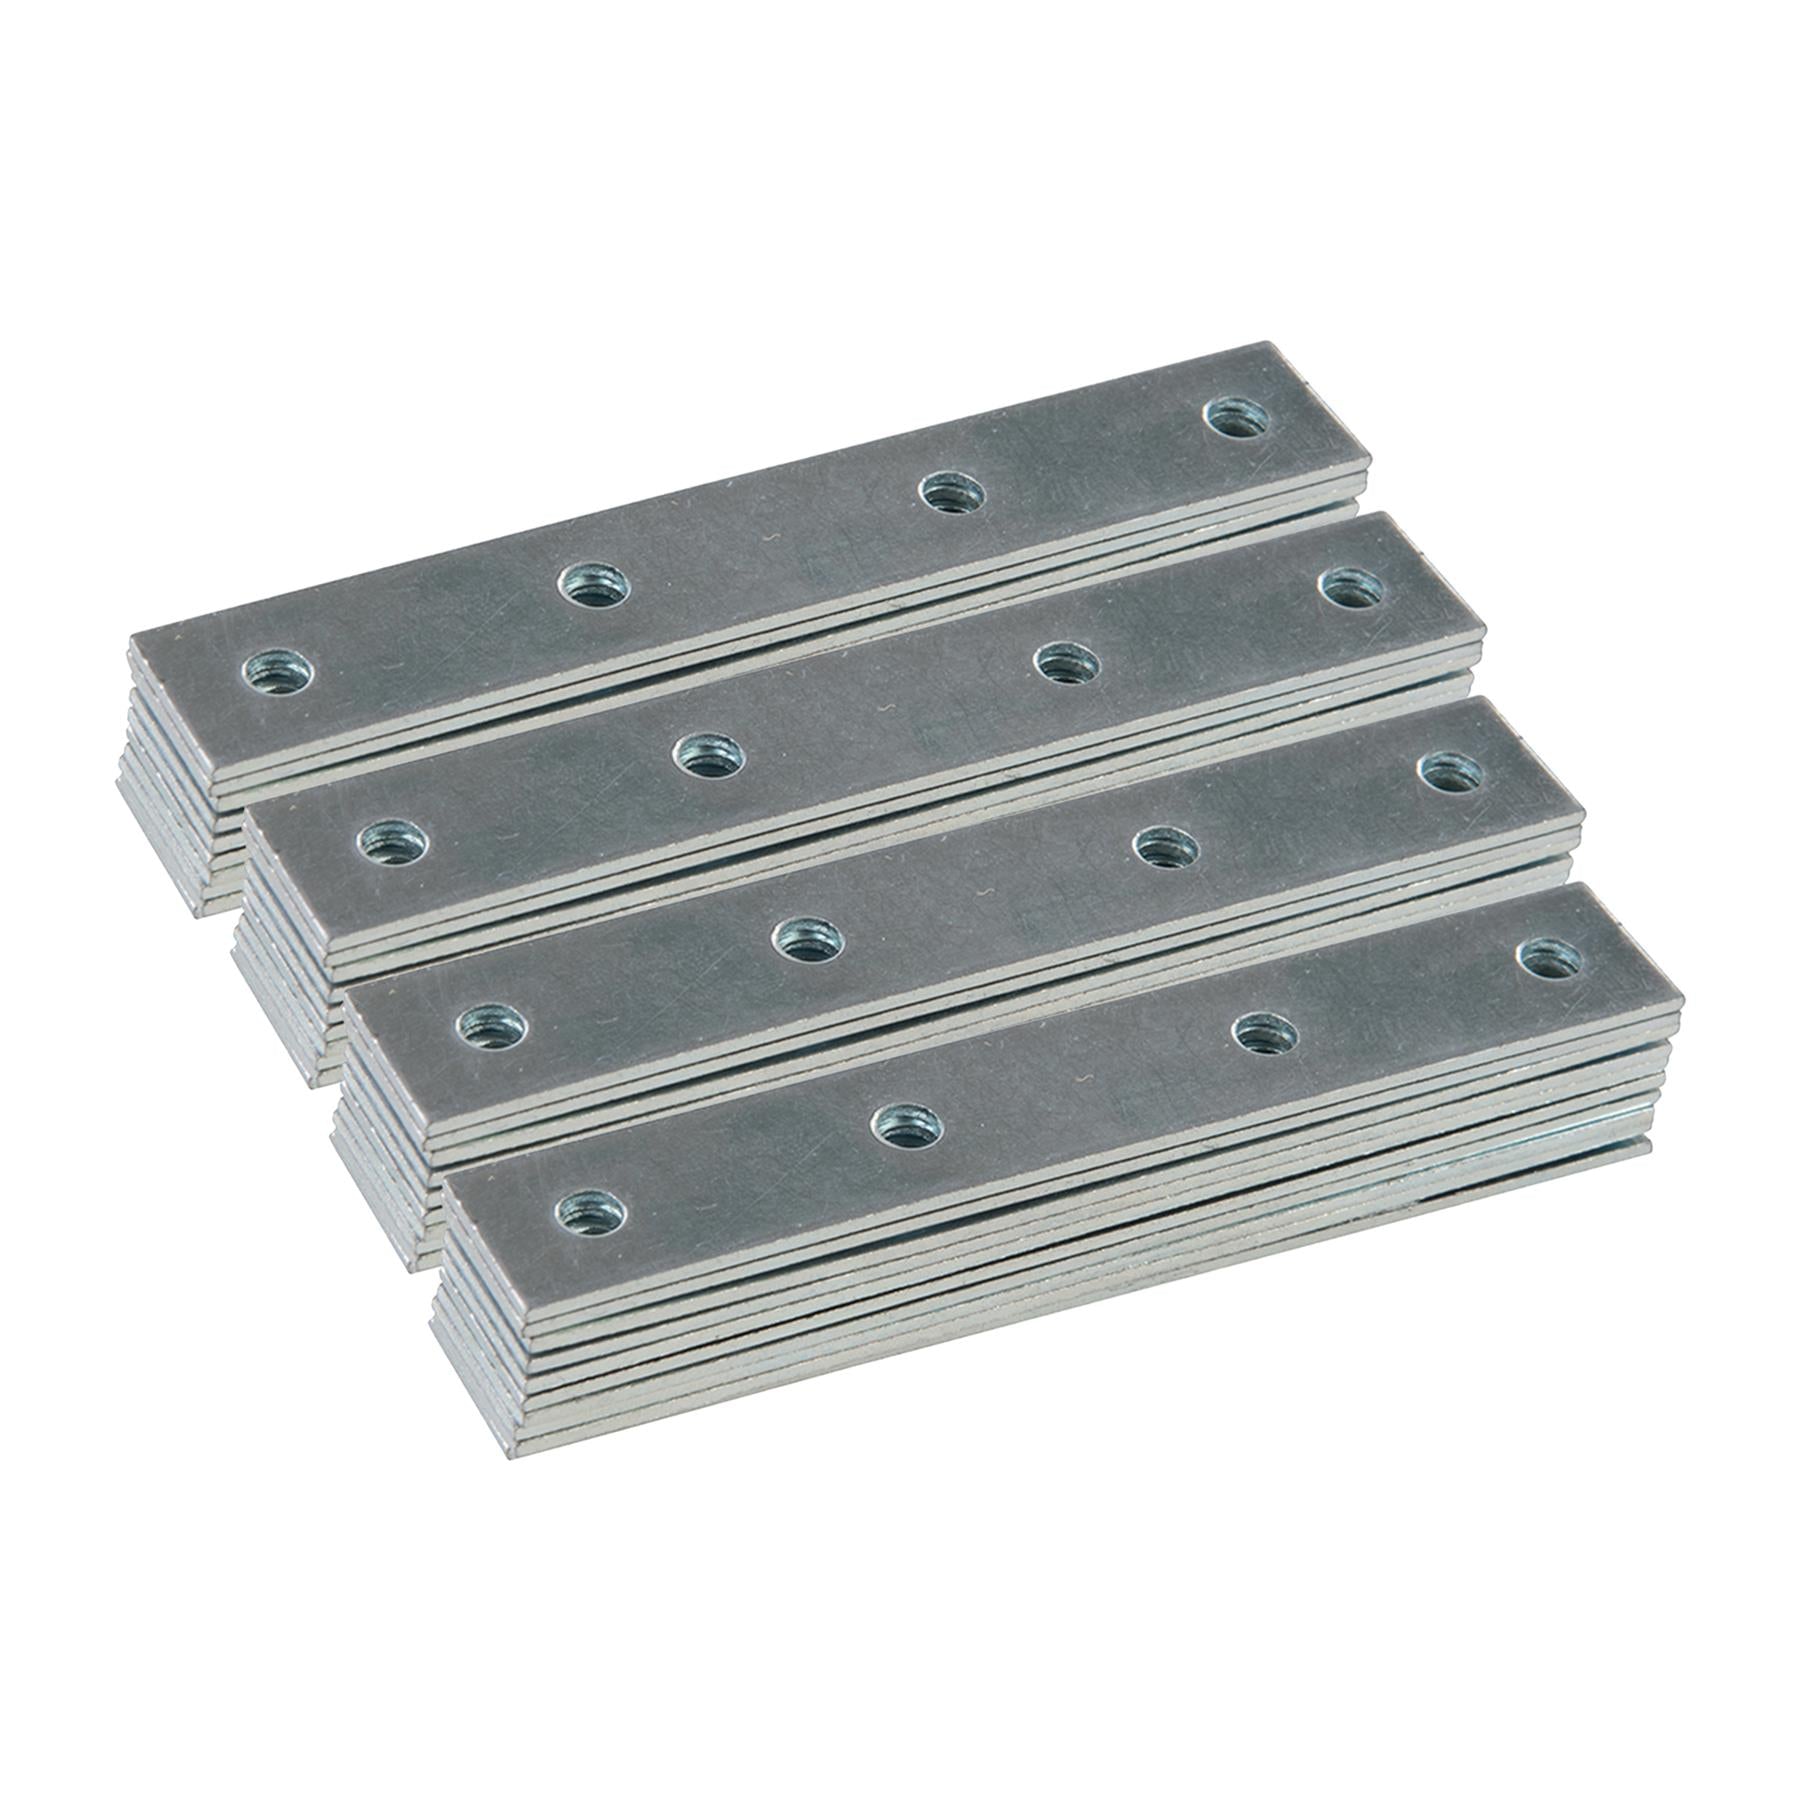 Mending Plates Zinc Plated With Offset Fixing Holes For Timber Repair 200Pk 100mm